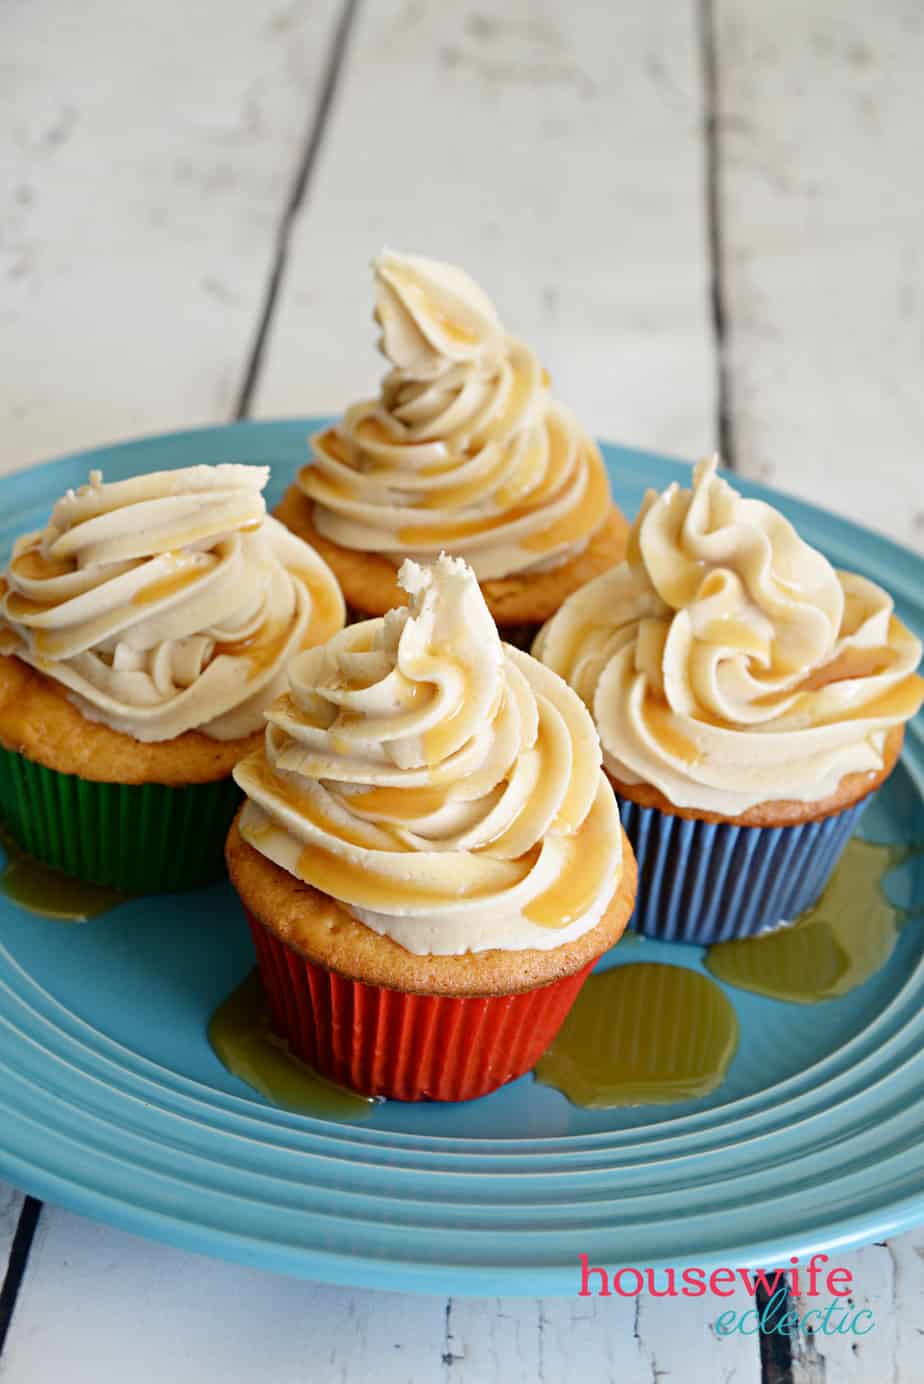 Harry Potter Butterbeer Cupcakes with Butterbeer Frosting